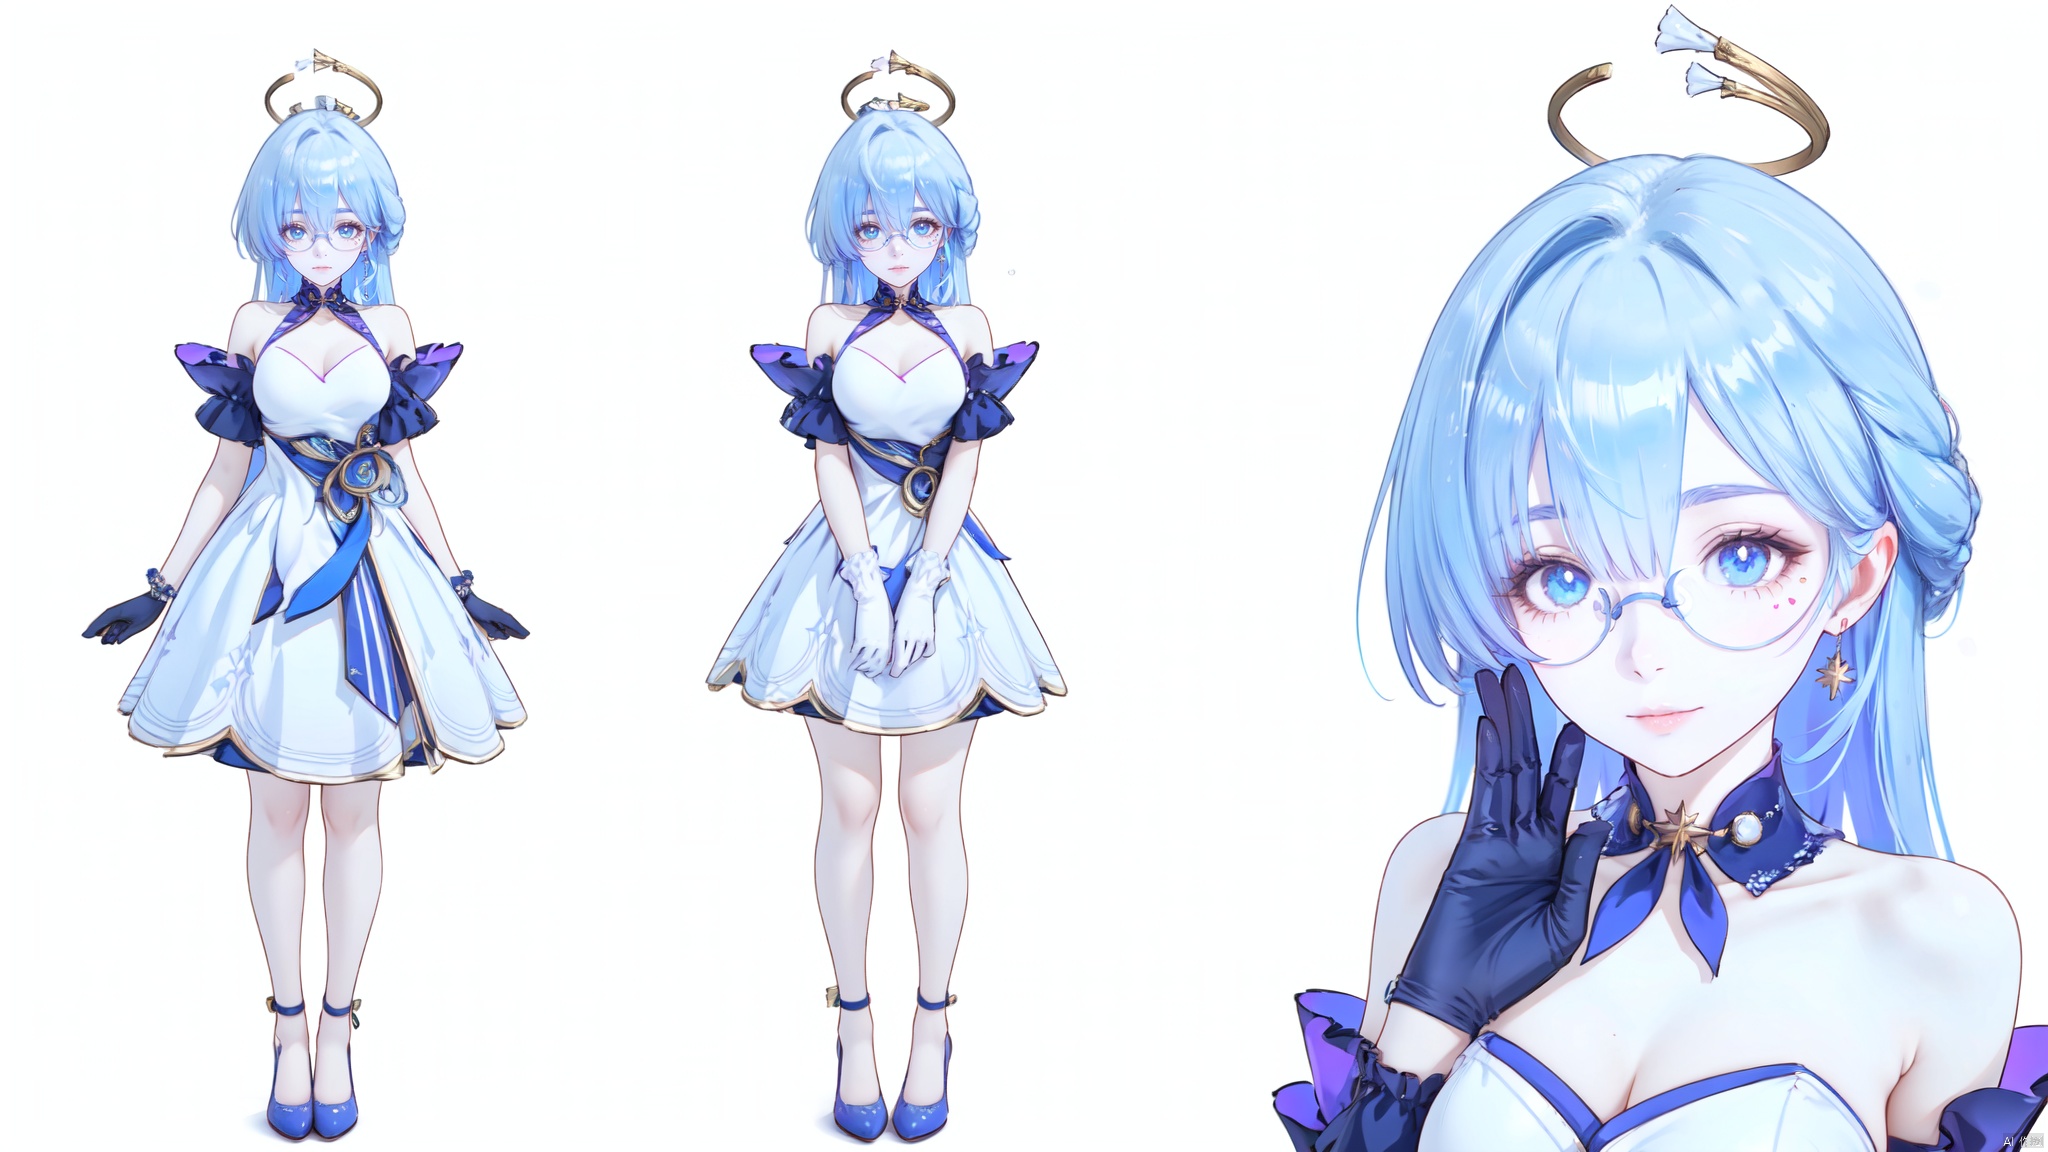  8k, best quality, masterpiece, (ultra-detailed:1.1), (high detailed skin),
(full body:1.3),
////////////////////////
zgn,1girl,long hair,halo,blue eyes,gloves,bangs,white dress,bare shoulders,blue hair,blue footwear,
///////////////////////////////
clothesviews,Differentclothes,Dress-updisplay,multipleviews,maid,t-shirt,blue_jeans,glasses,bunny_suit ,sports_uniform,nurse,white background, simple background,
\\\\\\\\\\\\\\\\\\\\\\
(beautiful_face), ((intricate_detail)), clear face,
((finely_detailed)), fine_fabric_emphasis,
((glossy)), full_shot, Anime, melowh, Art style, fantasy